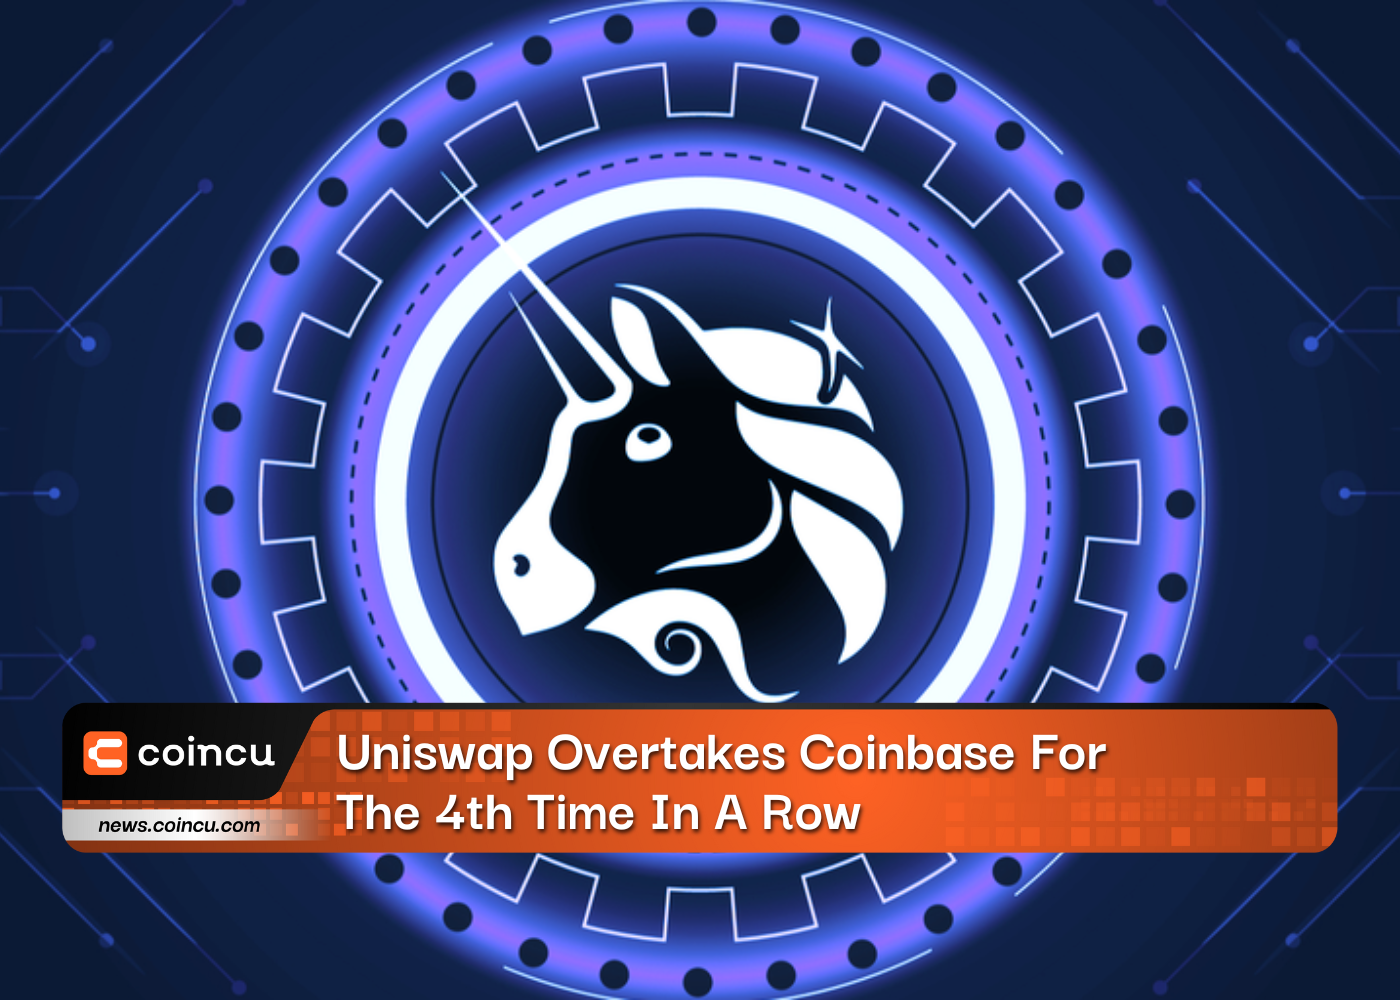 Uniswap Overtakes Coinbase For The 4th Time In A Row